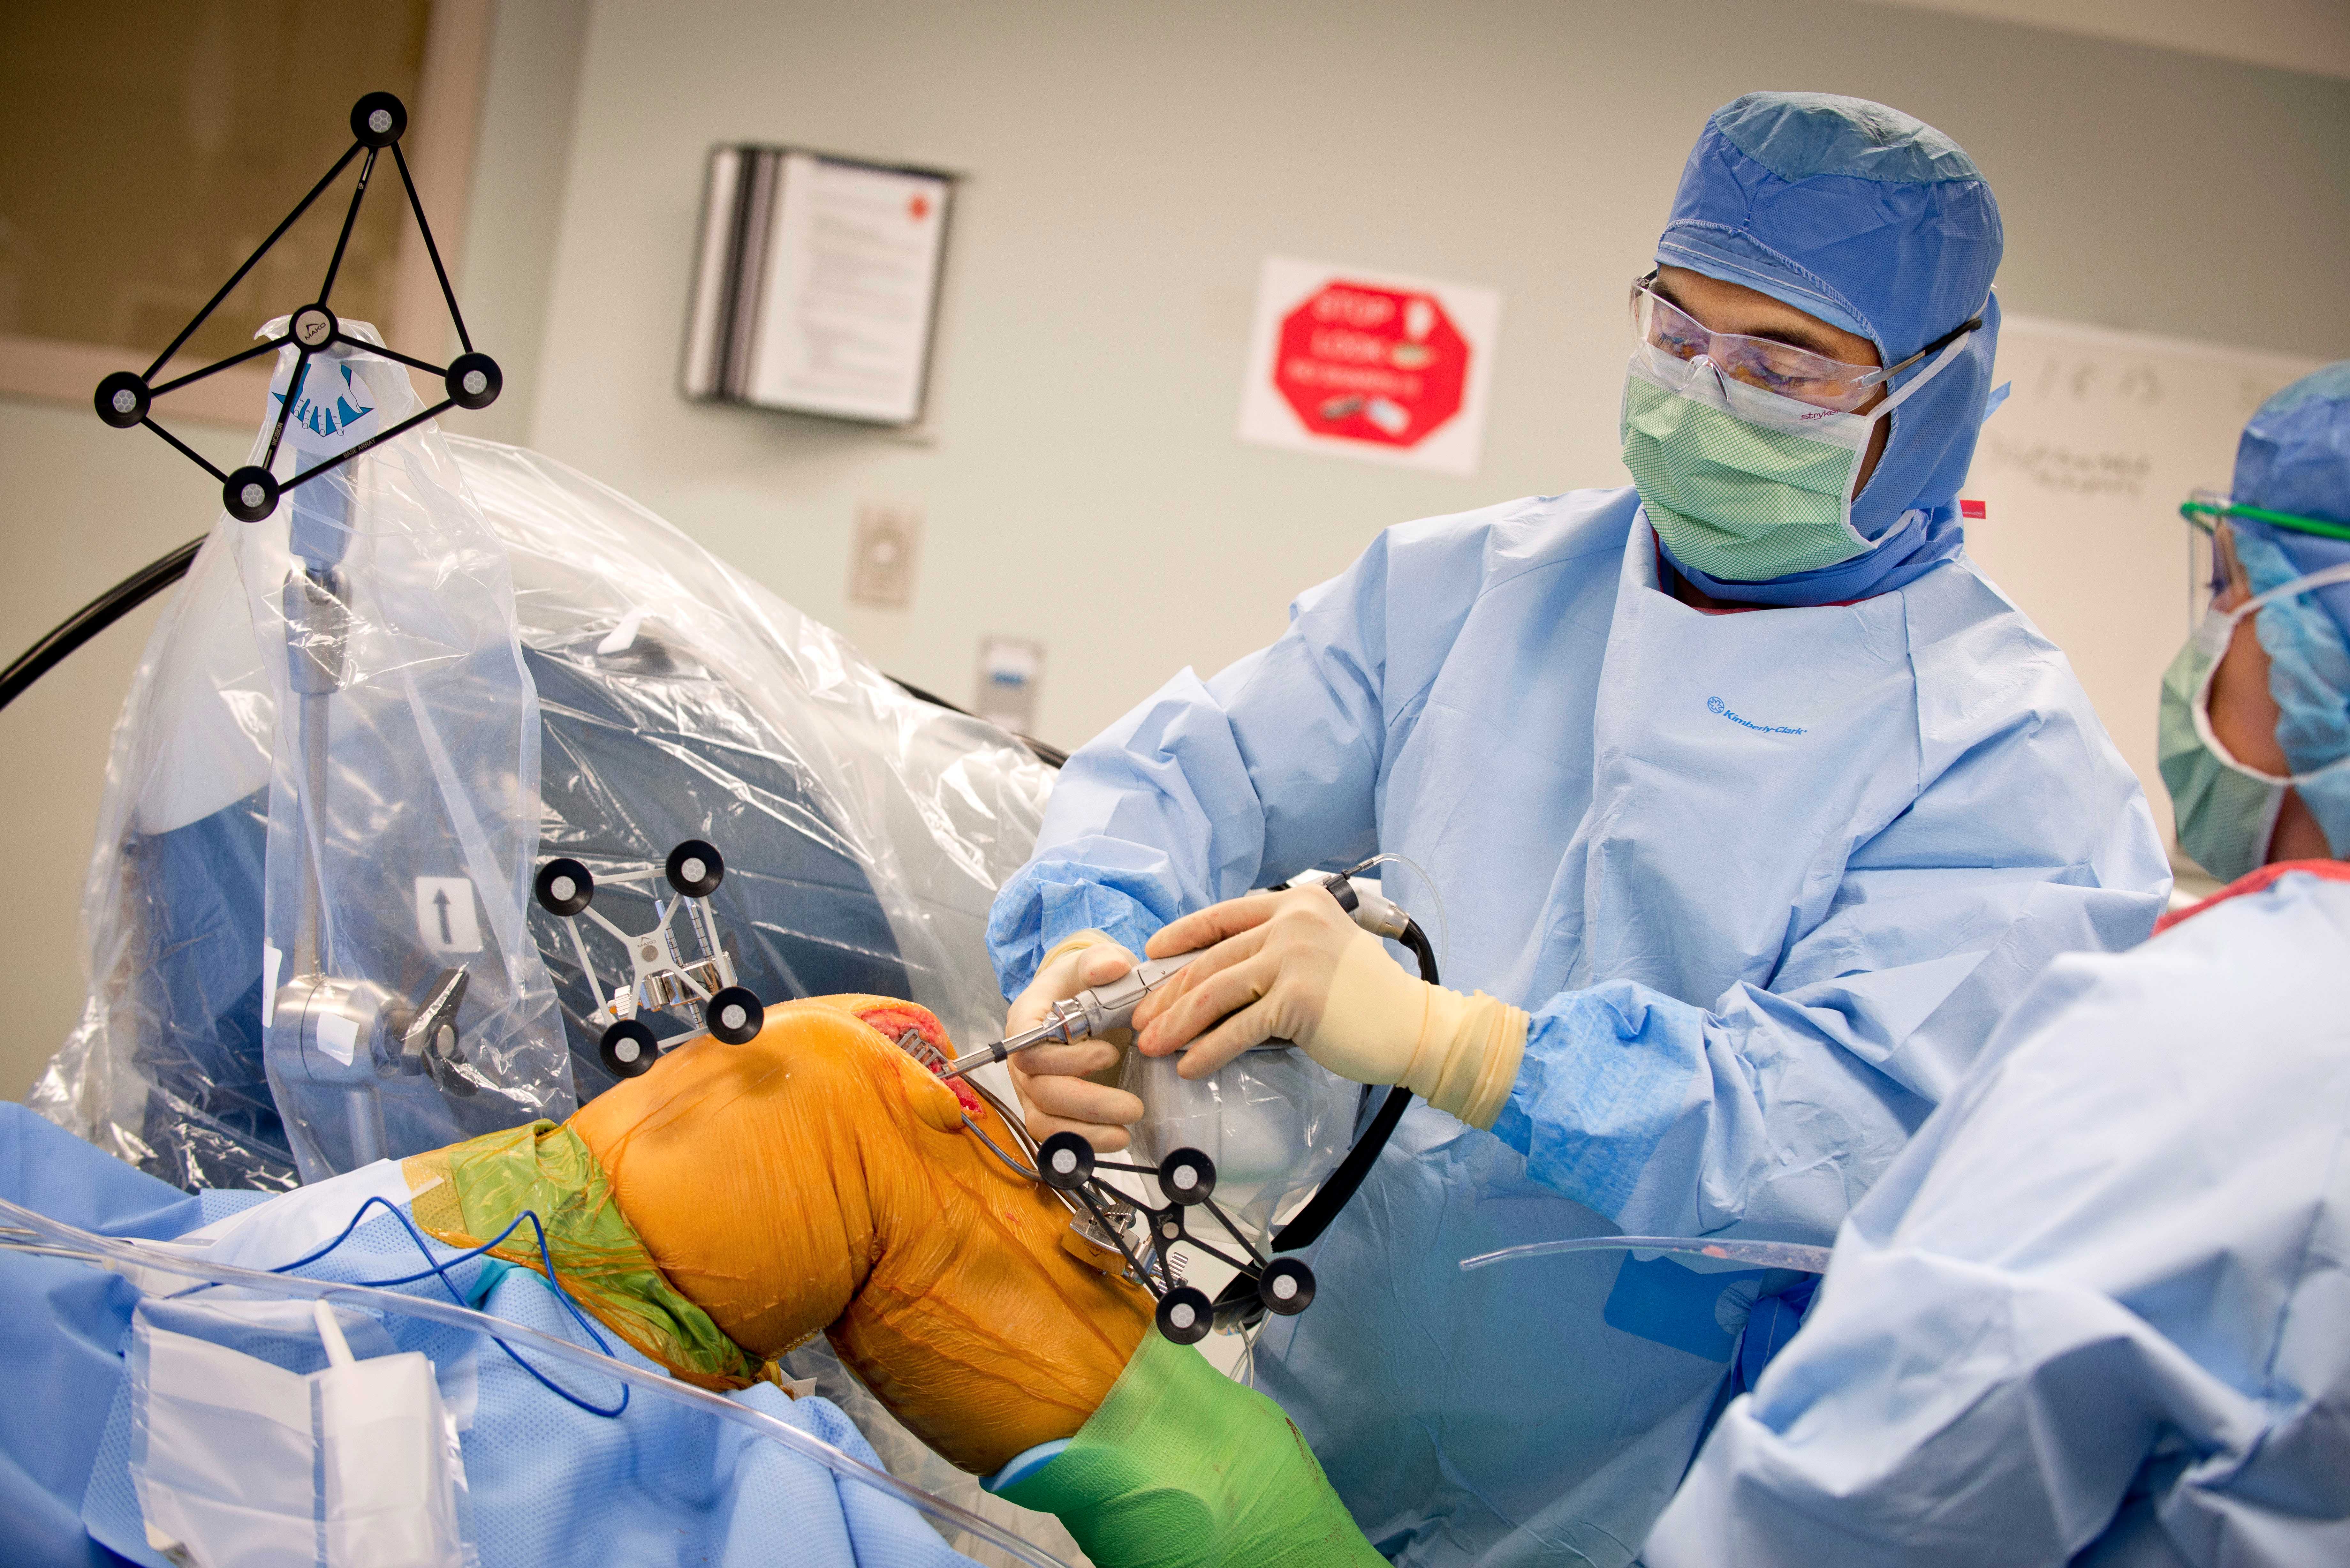 Robot performs first knee surgery at